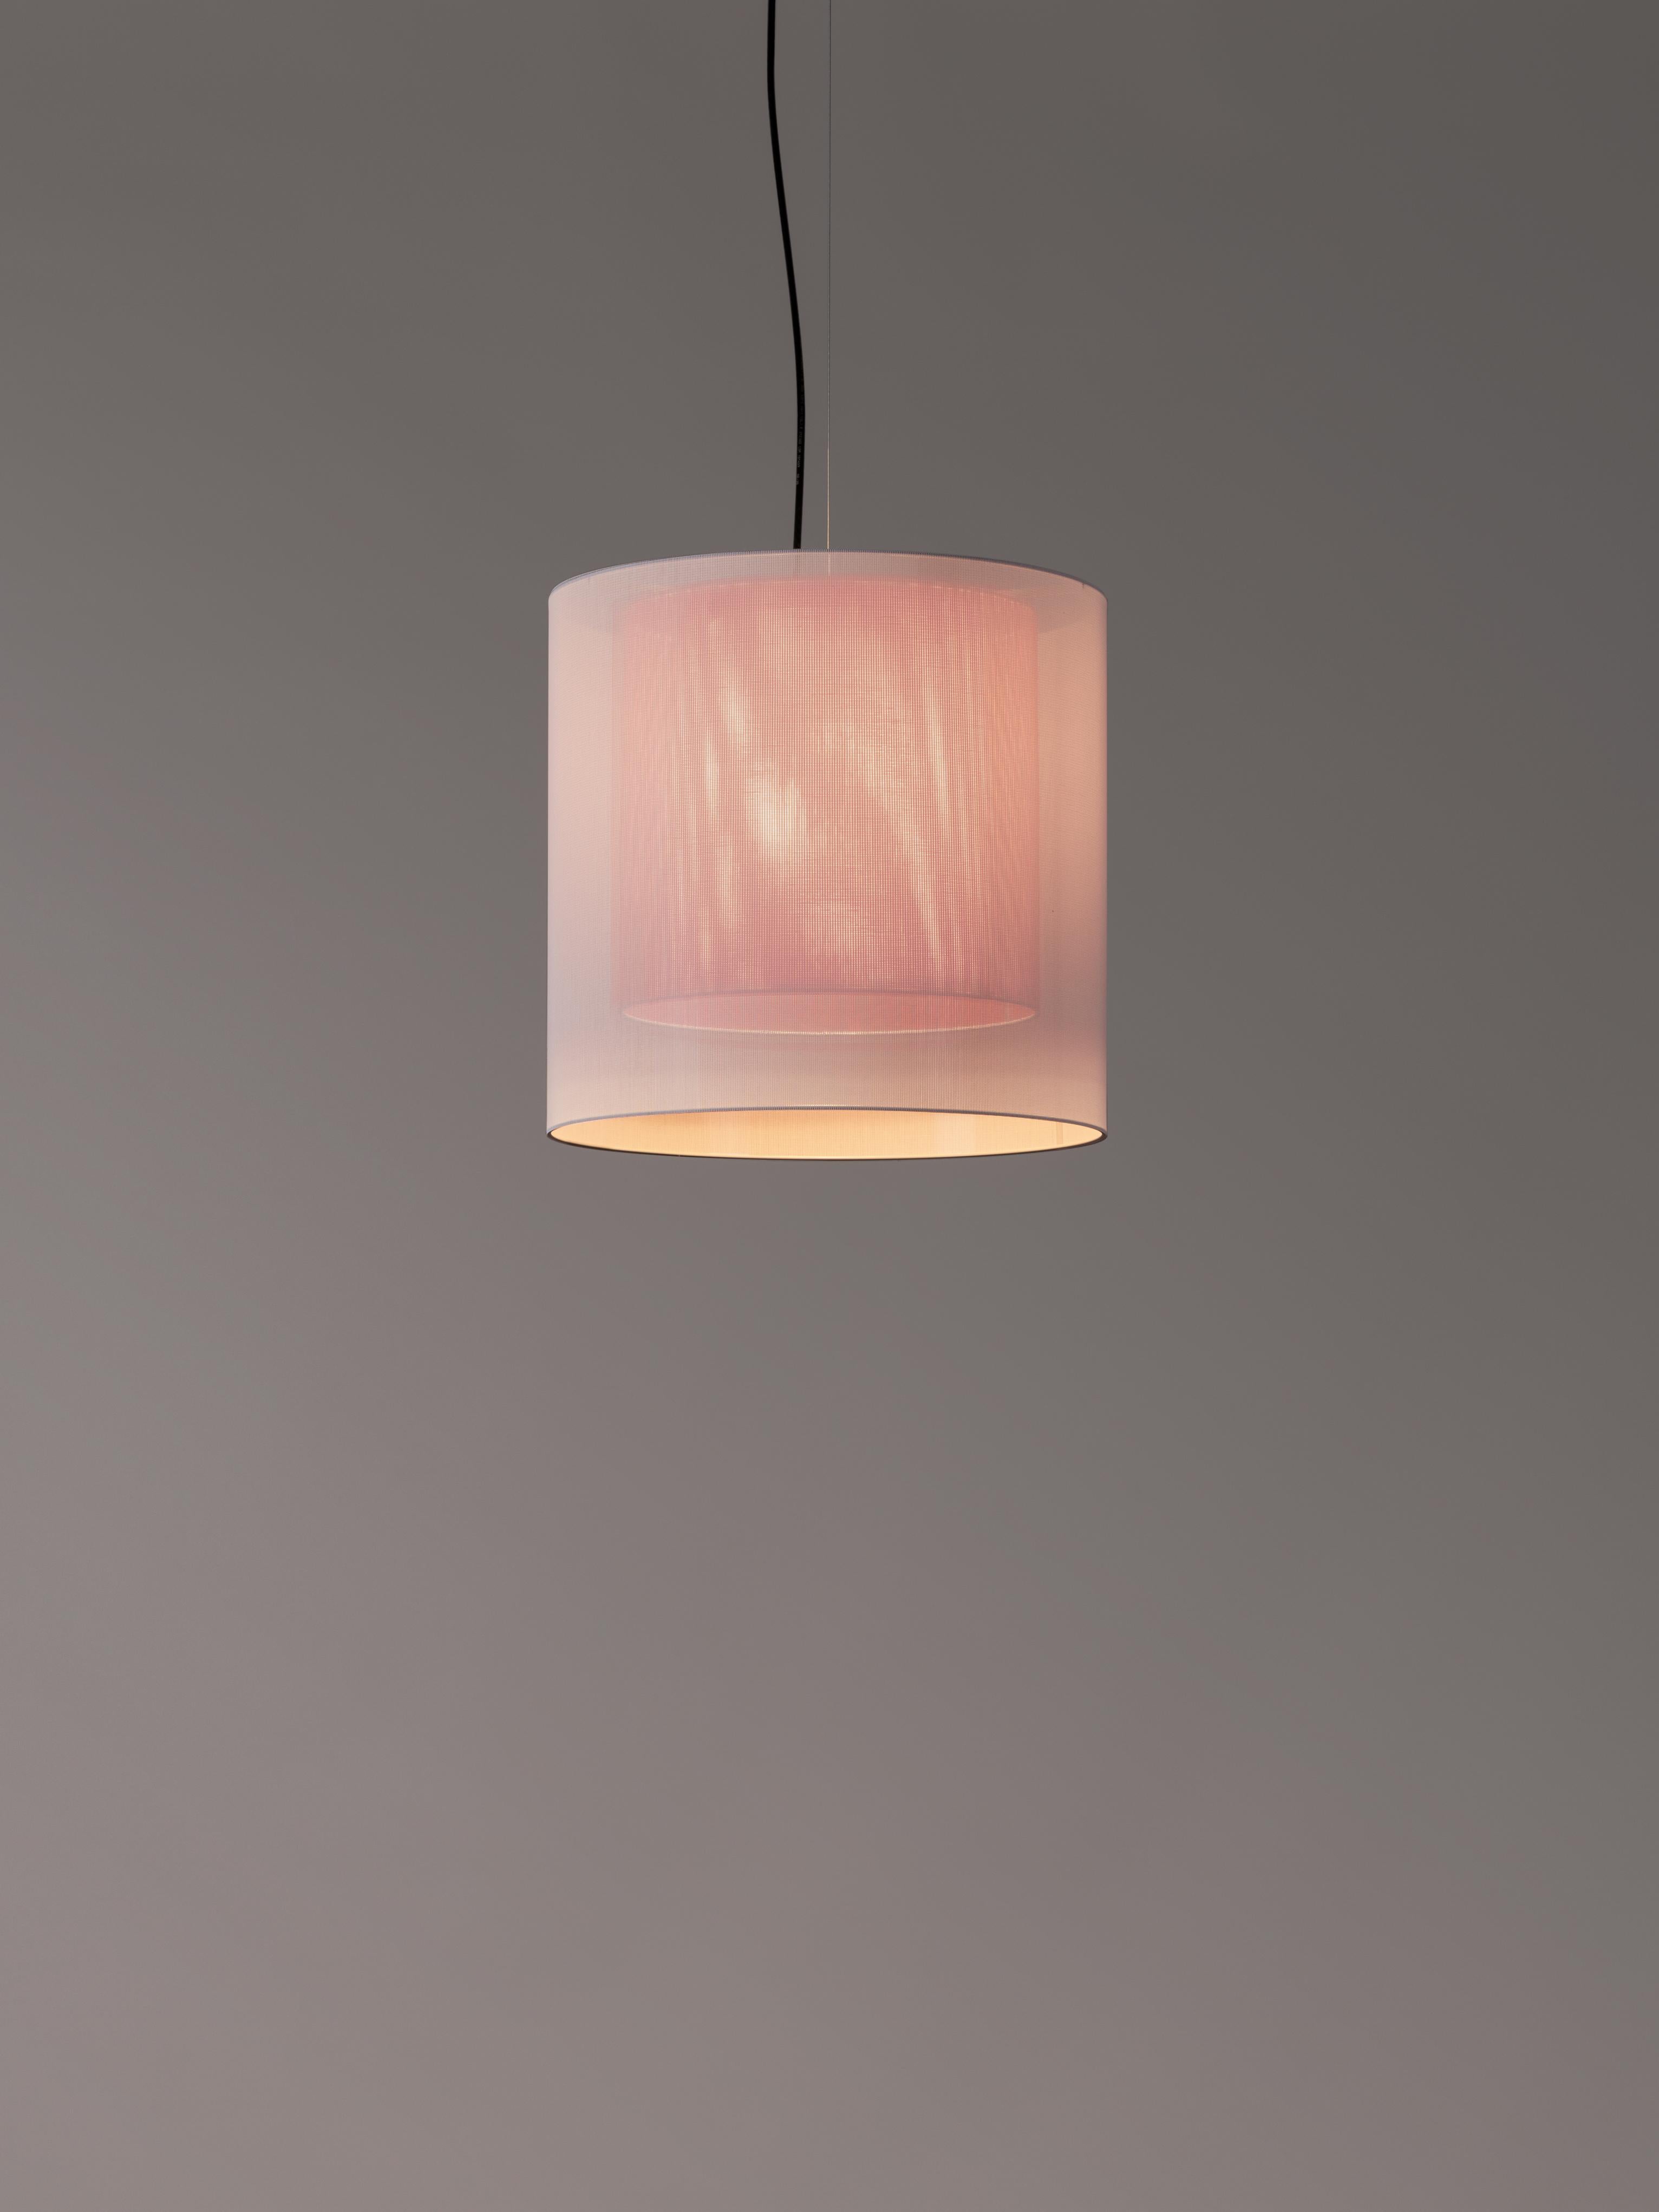 White and red Moaré MS pendant lamp by Antoni Arola
Dimensions: D 46 x H 45 cm
Materials: Metal, polyester.
Available in other colors and sizes.

Moaré’s multiple combinations of formats and colours make it highly versatile. The series takes